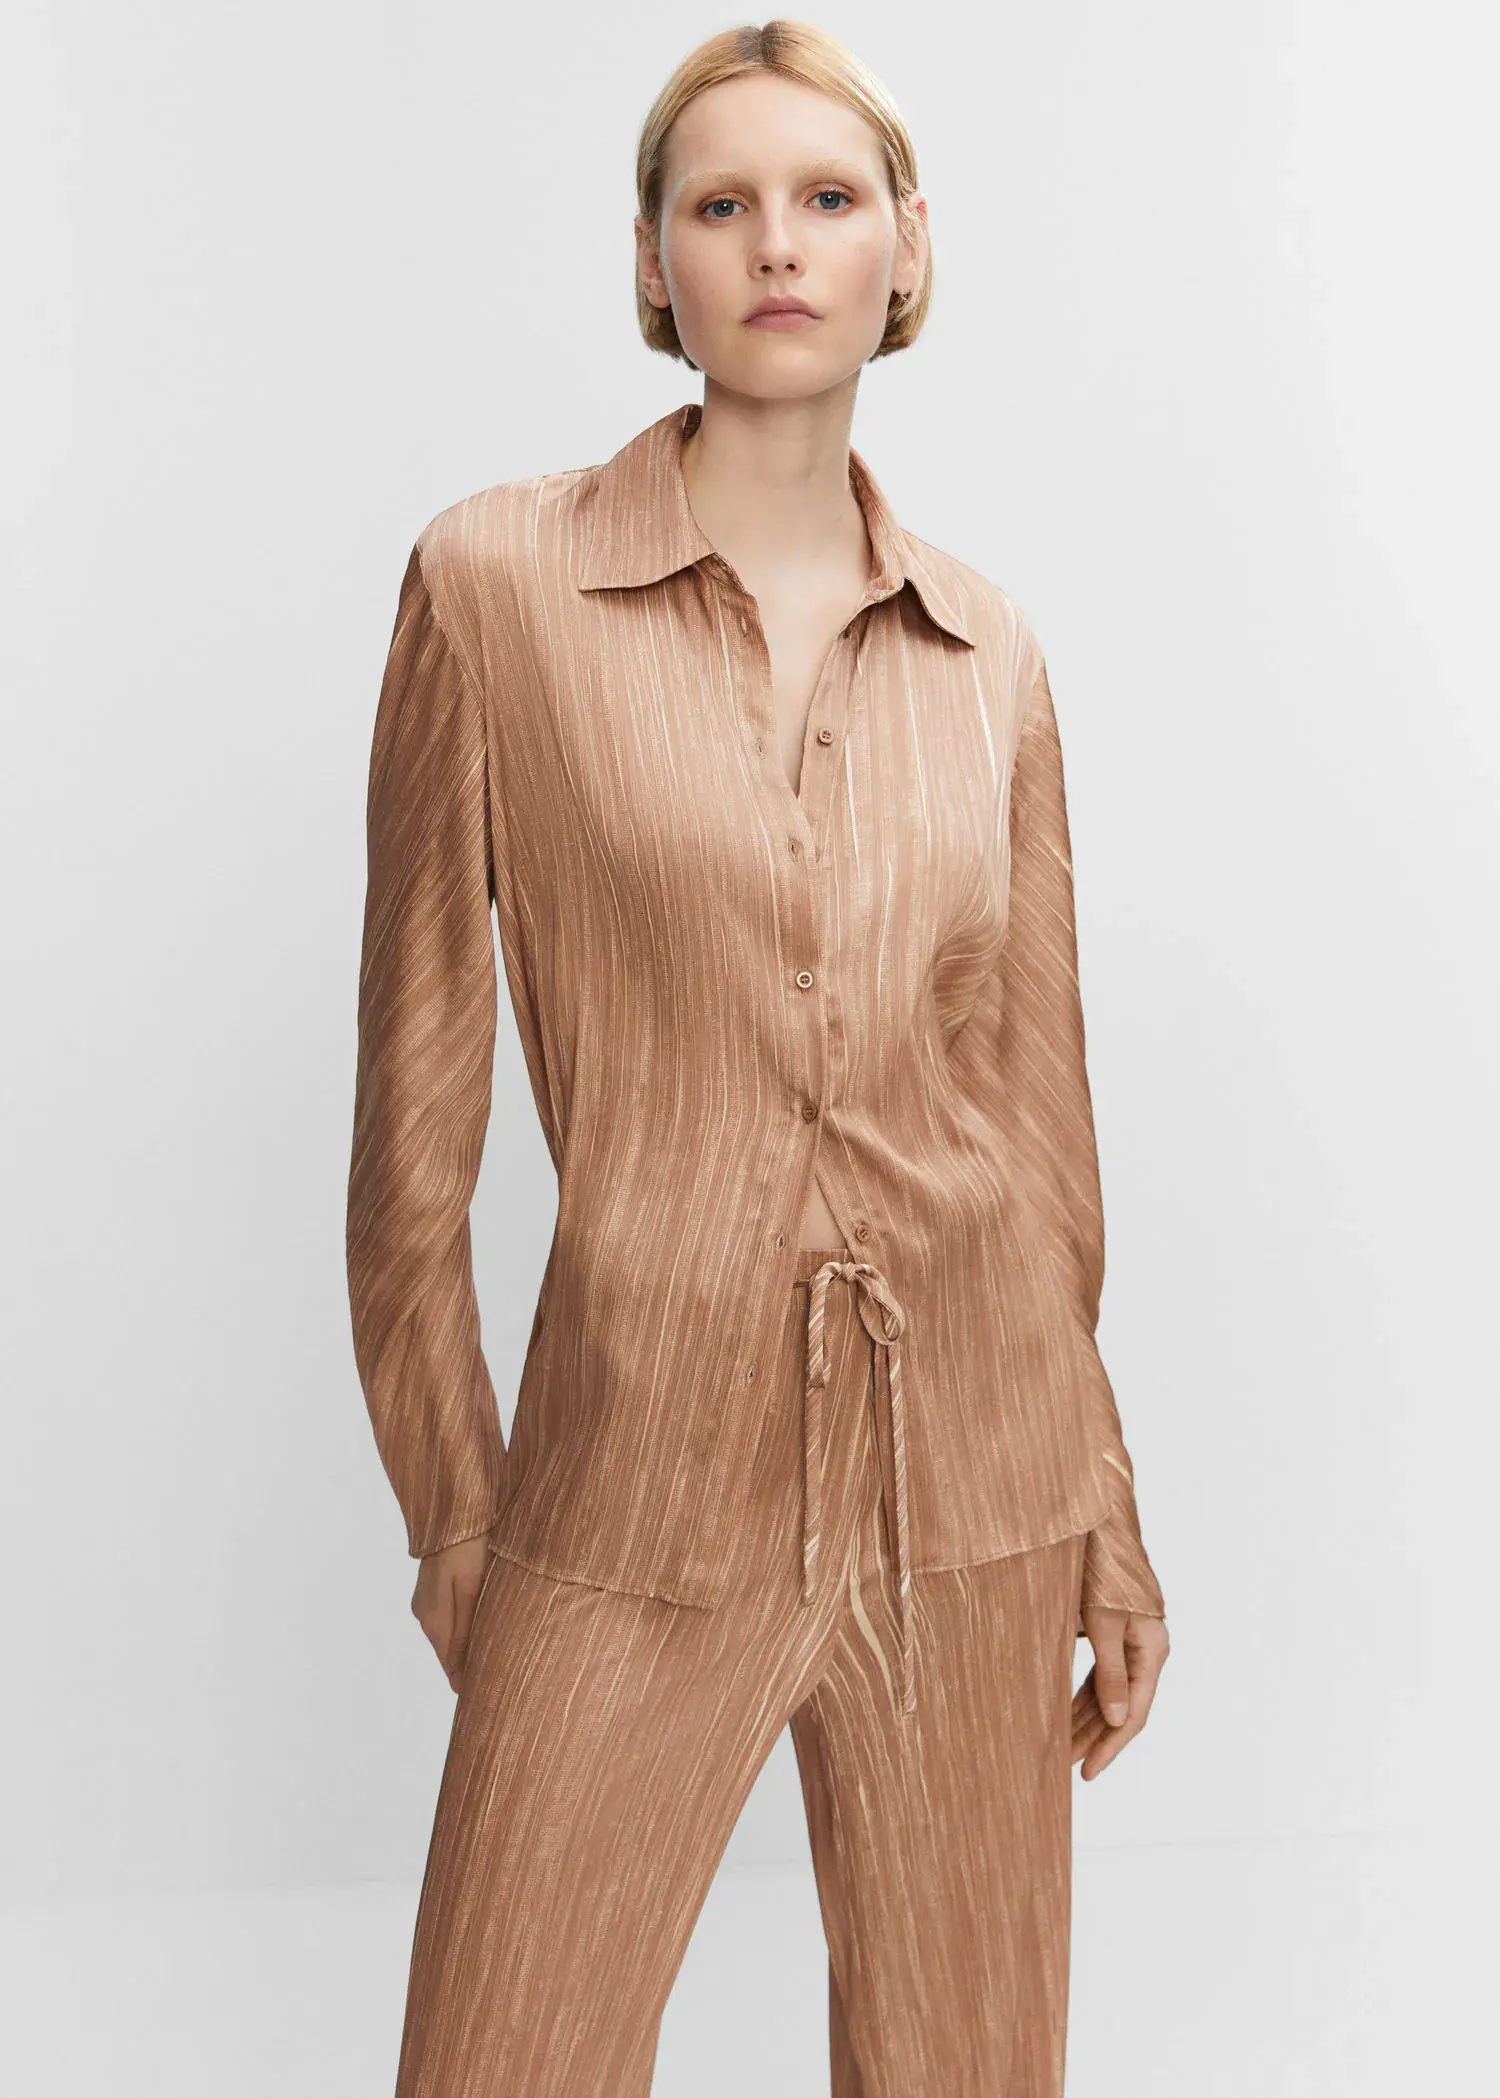 Mango Satin pleated shirt. a woman in a tan shirt is standing in front of a white wall. 